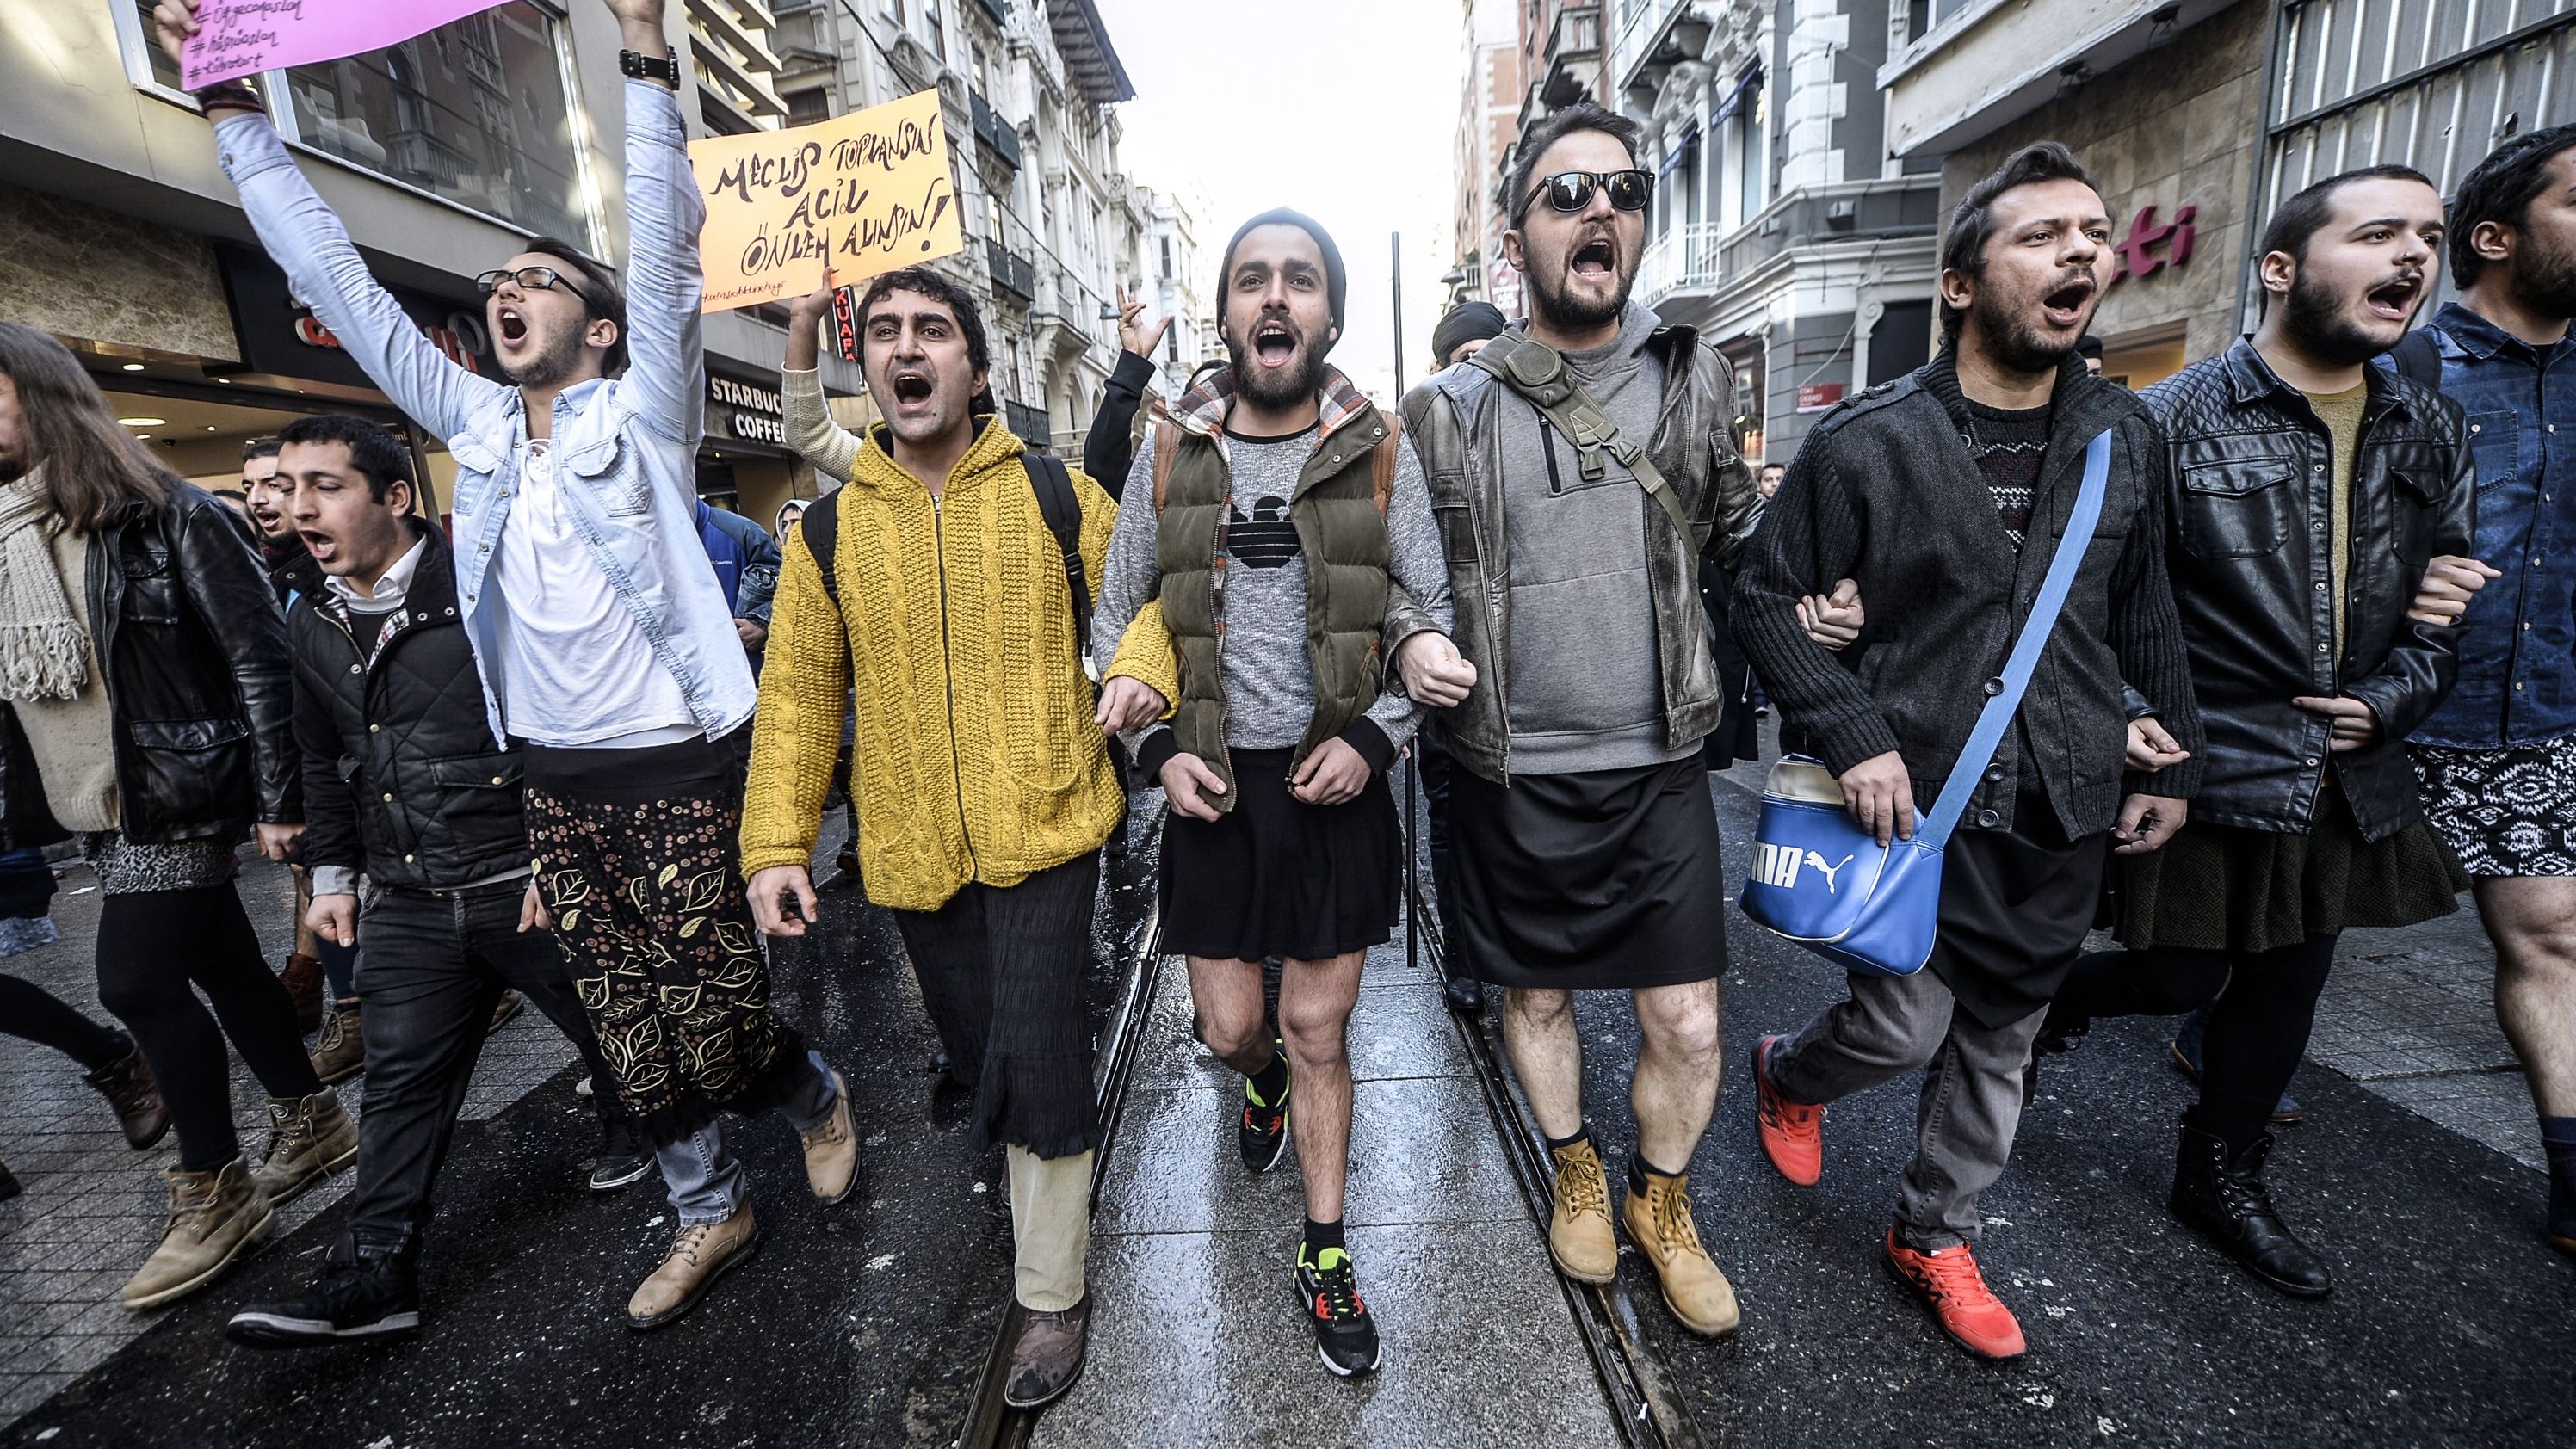 Turkish men wearing skirts demonstrate in Istanbul to support women's rights in memory of 20-year-old murdered woman Ozgecan Aslan on February 21, 2015.